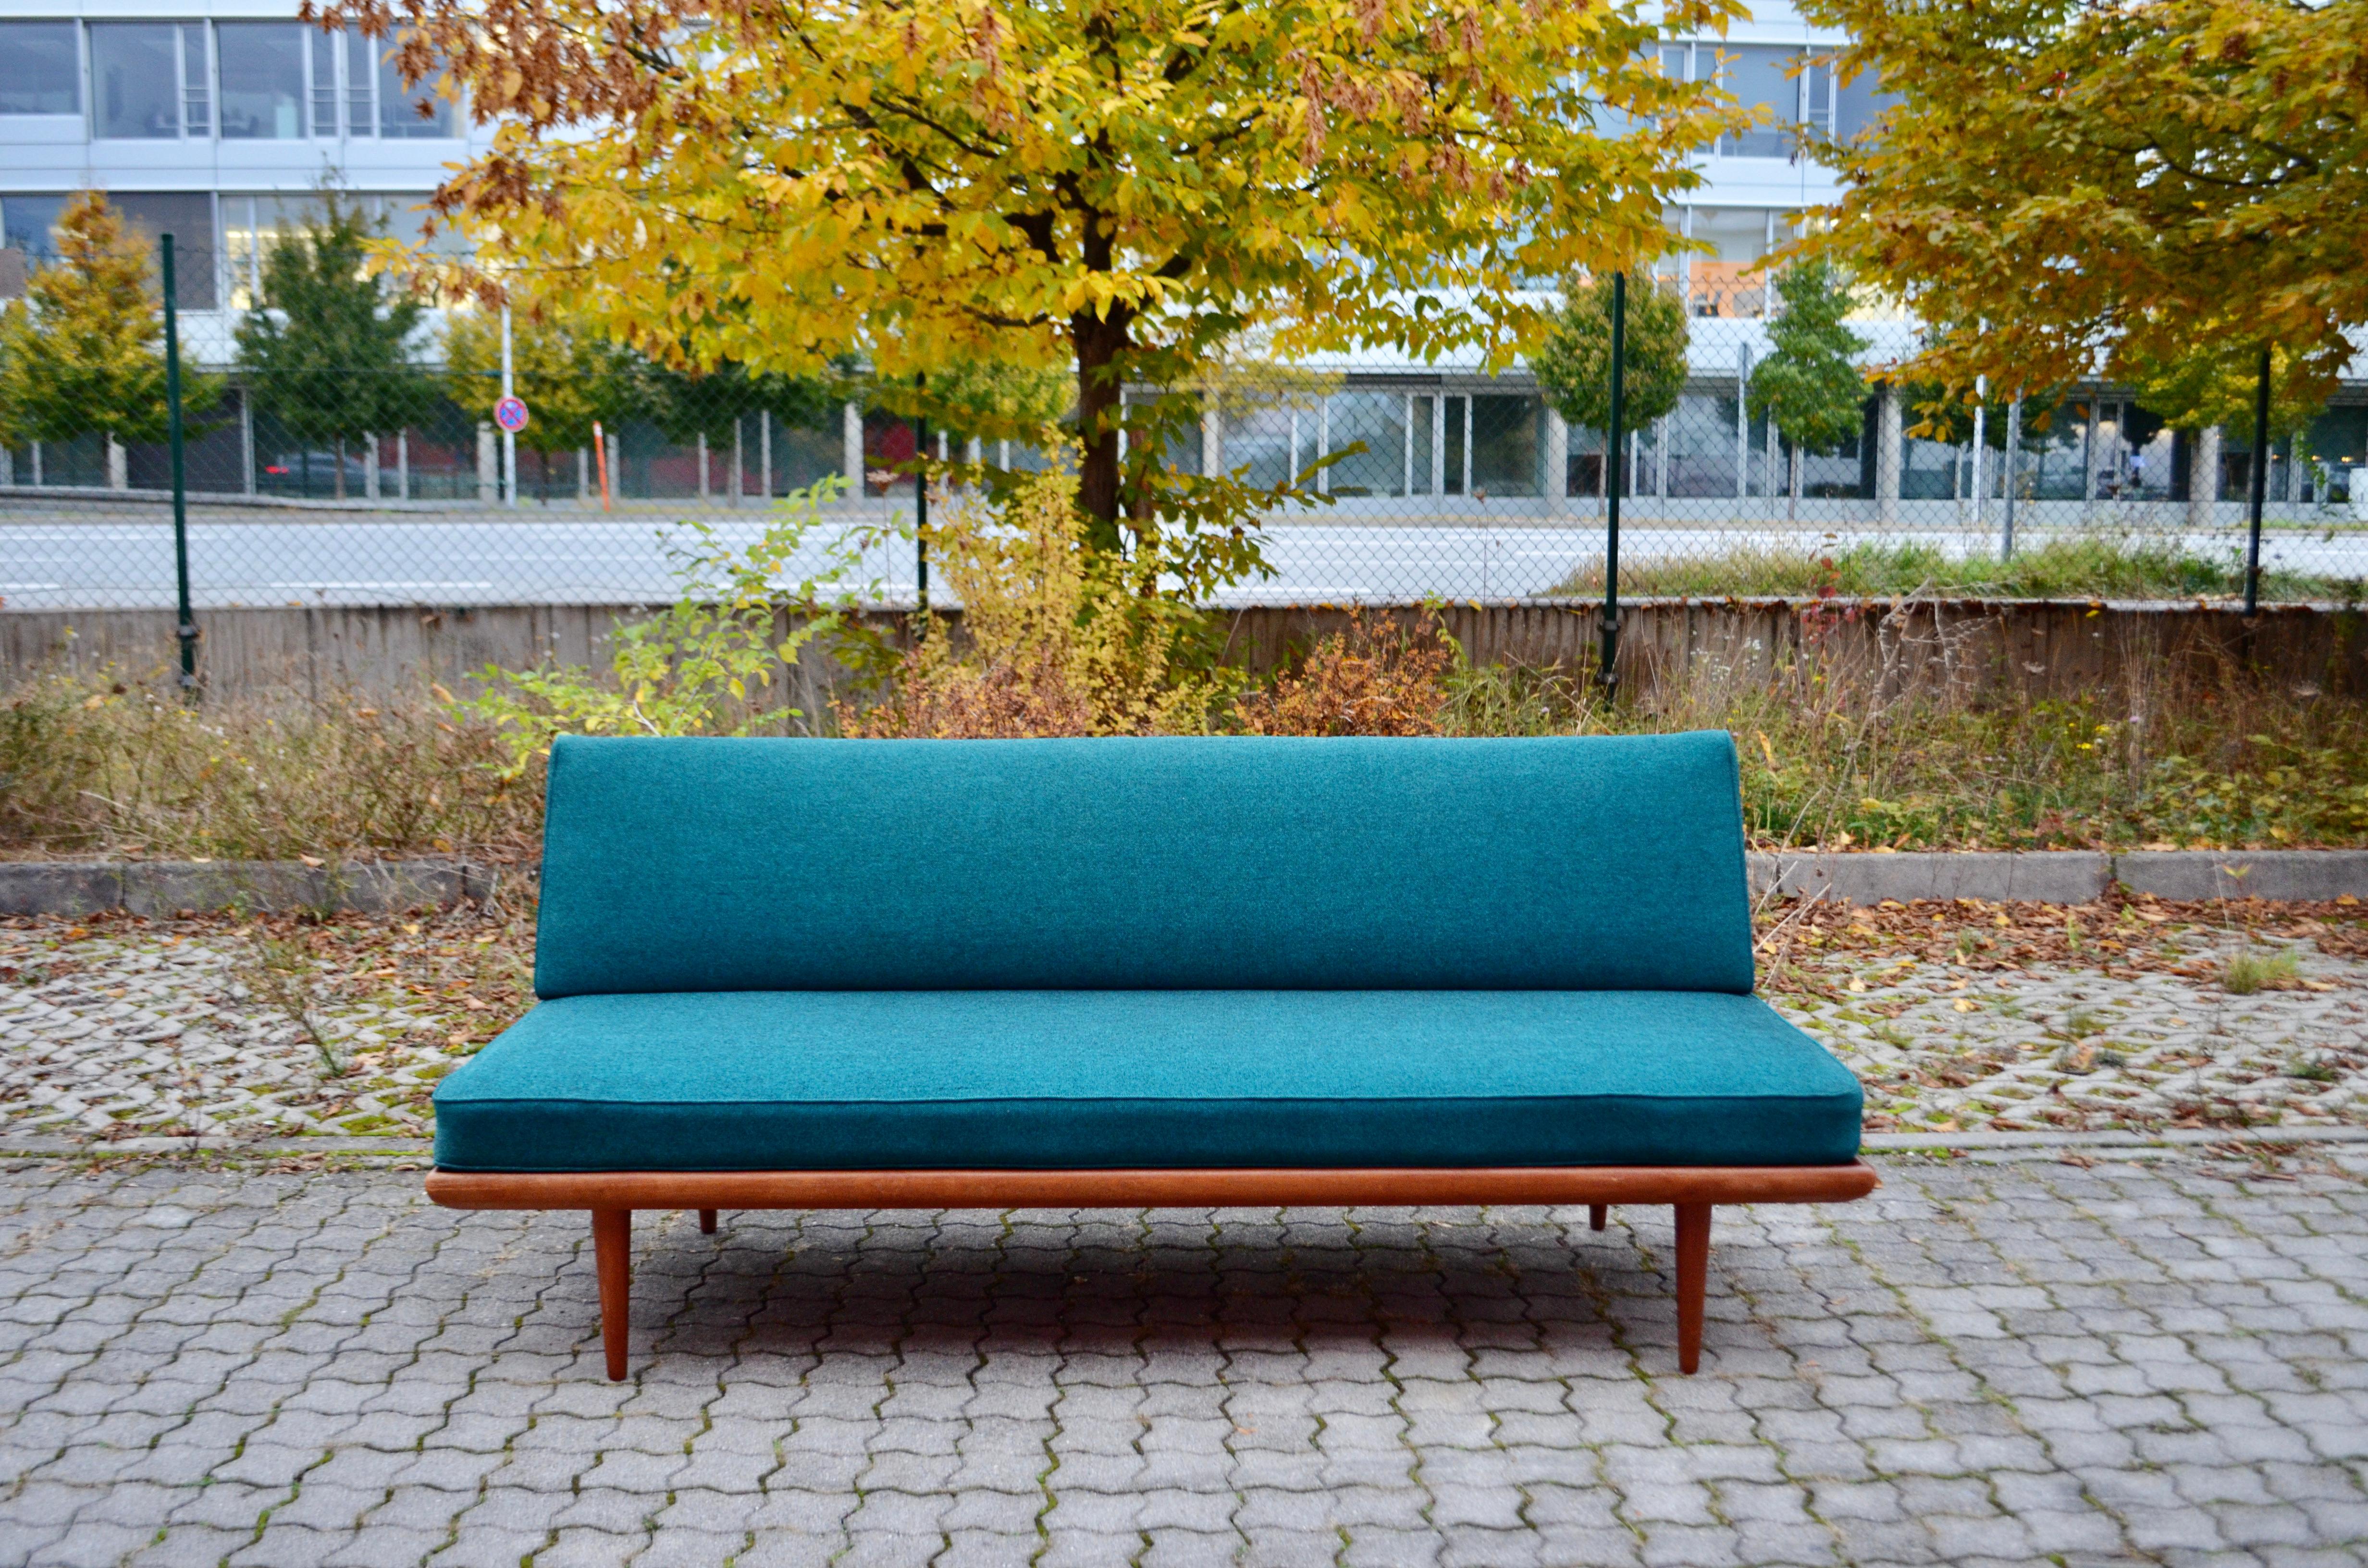 Mid century daybed modell minerva by Peter Hvidt & Orla Mølgaard-Nielsen for France & Son.
The frame is made of solid teak wood.
The fabric is a turquoise colour Halingdal from Kvadrat in mint condition.
It was upholstered new.